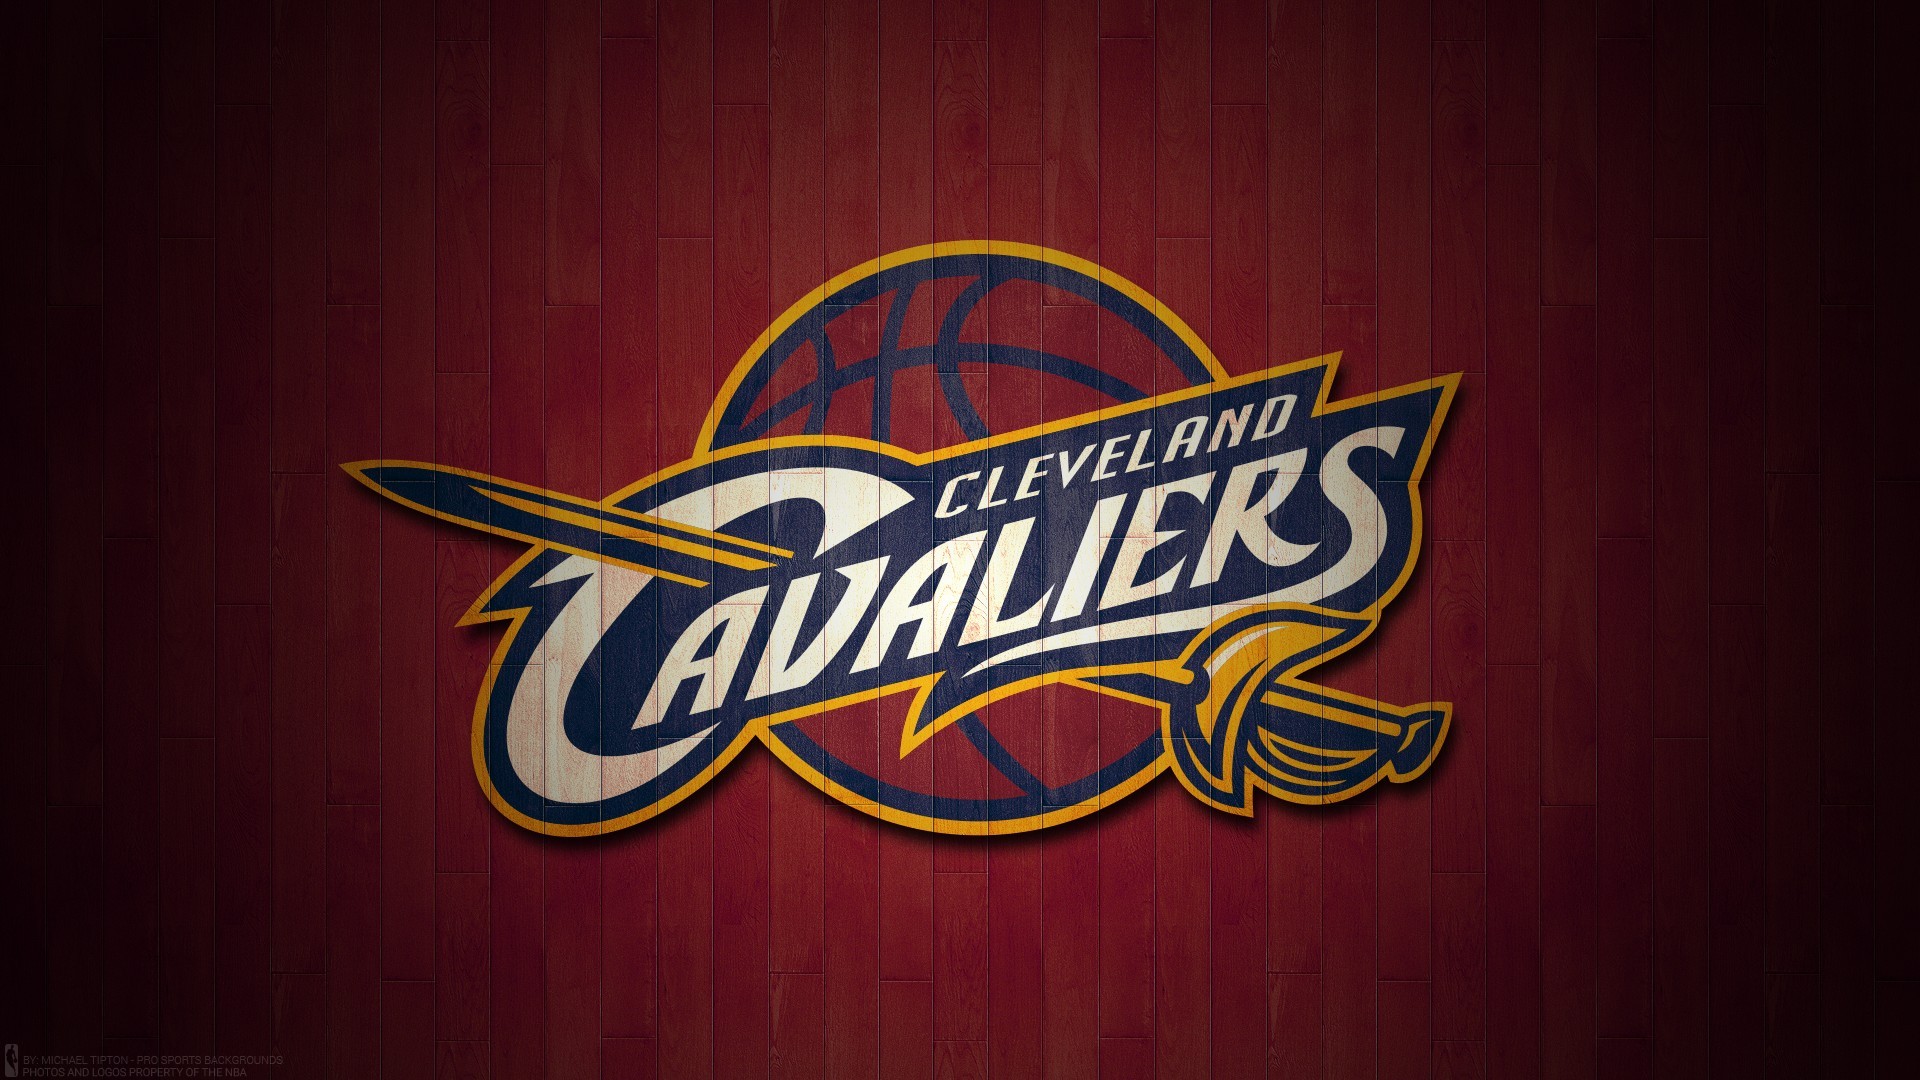 HD Cleveland Cavaliers Backgrounds 1920x1080